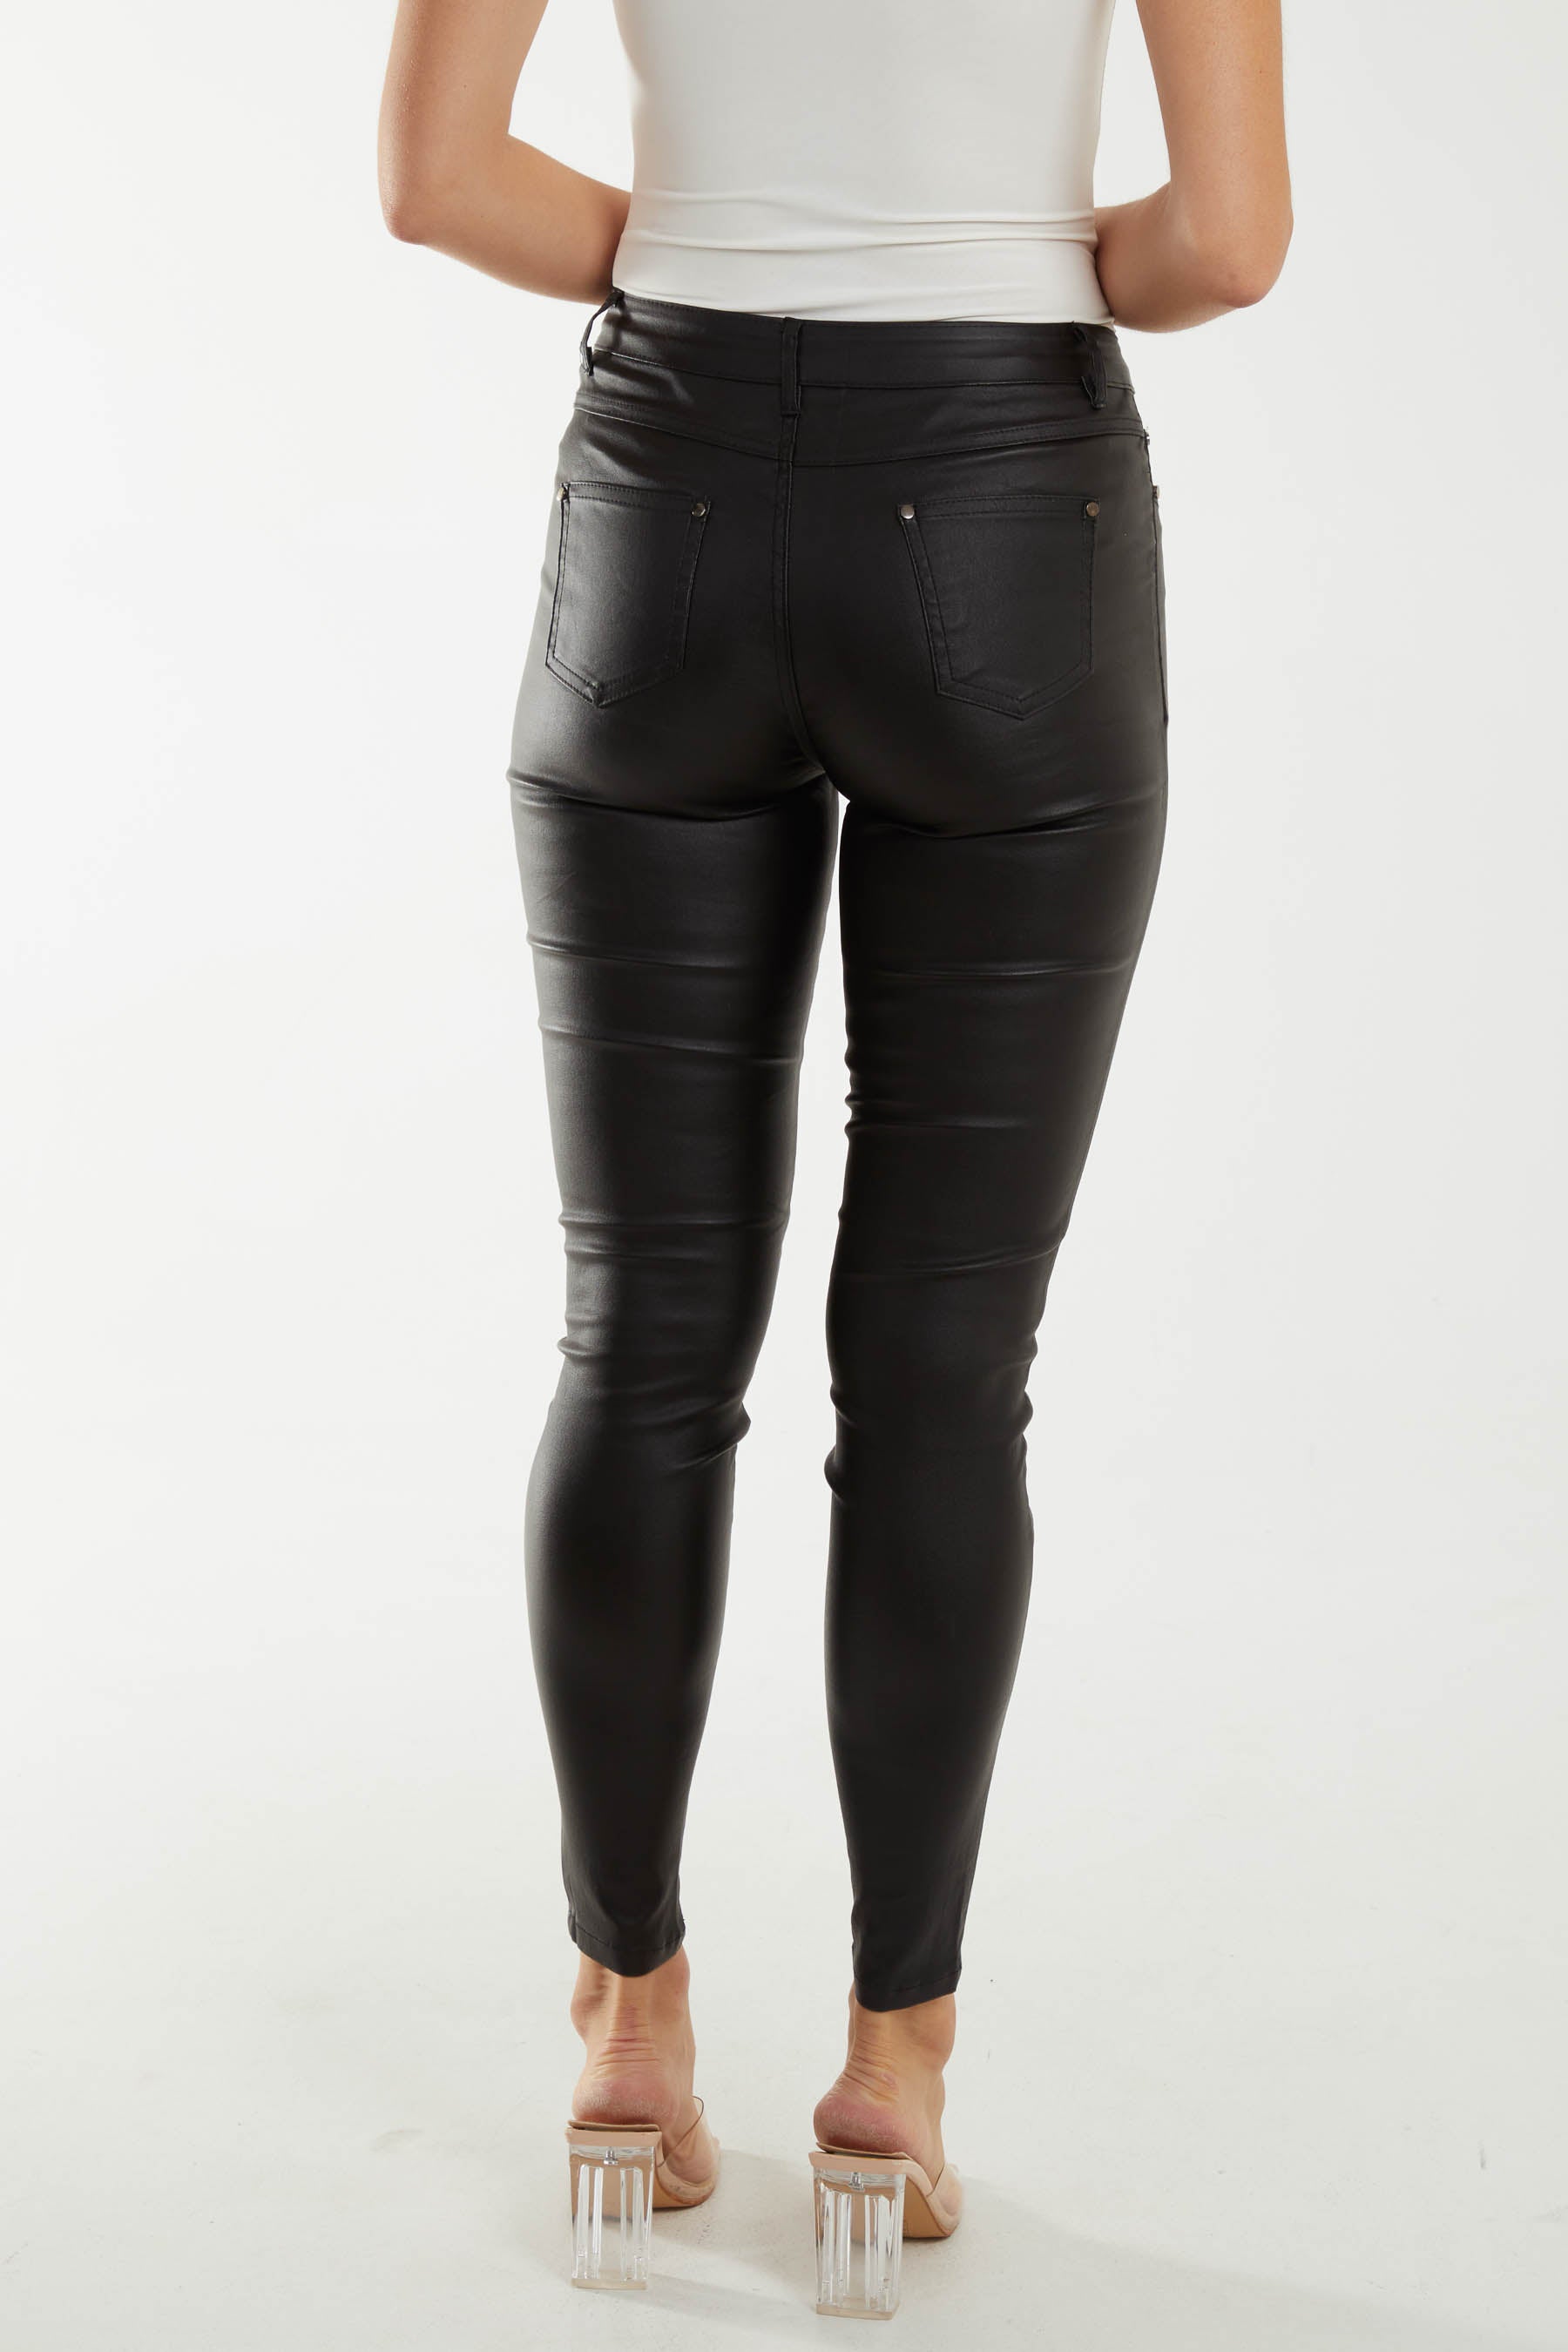 Mid Rise Faux Leather Skinny Jeans